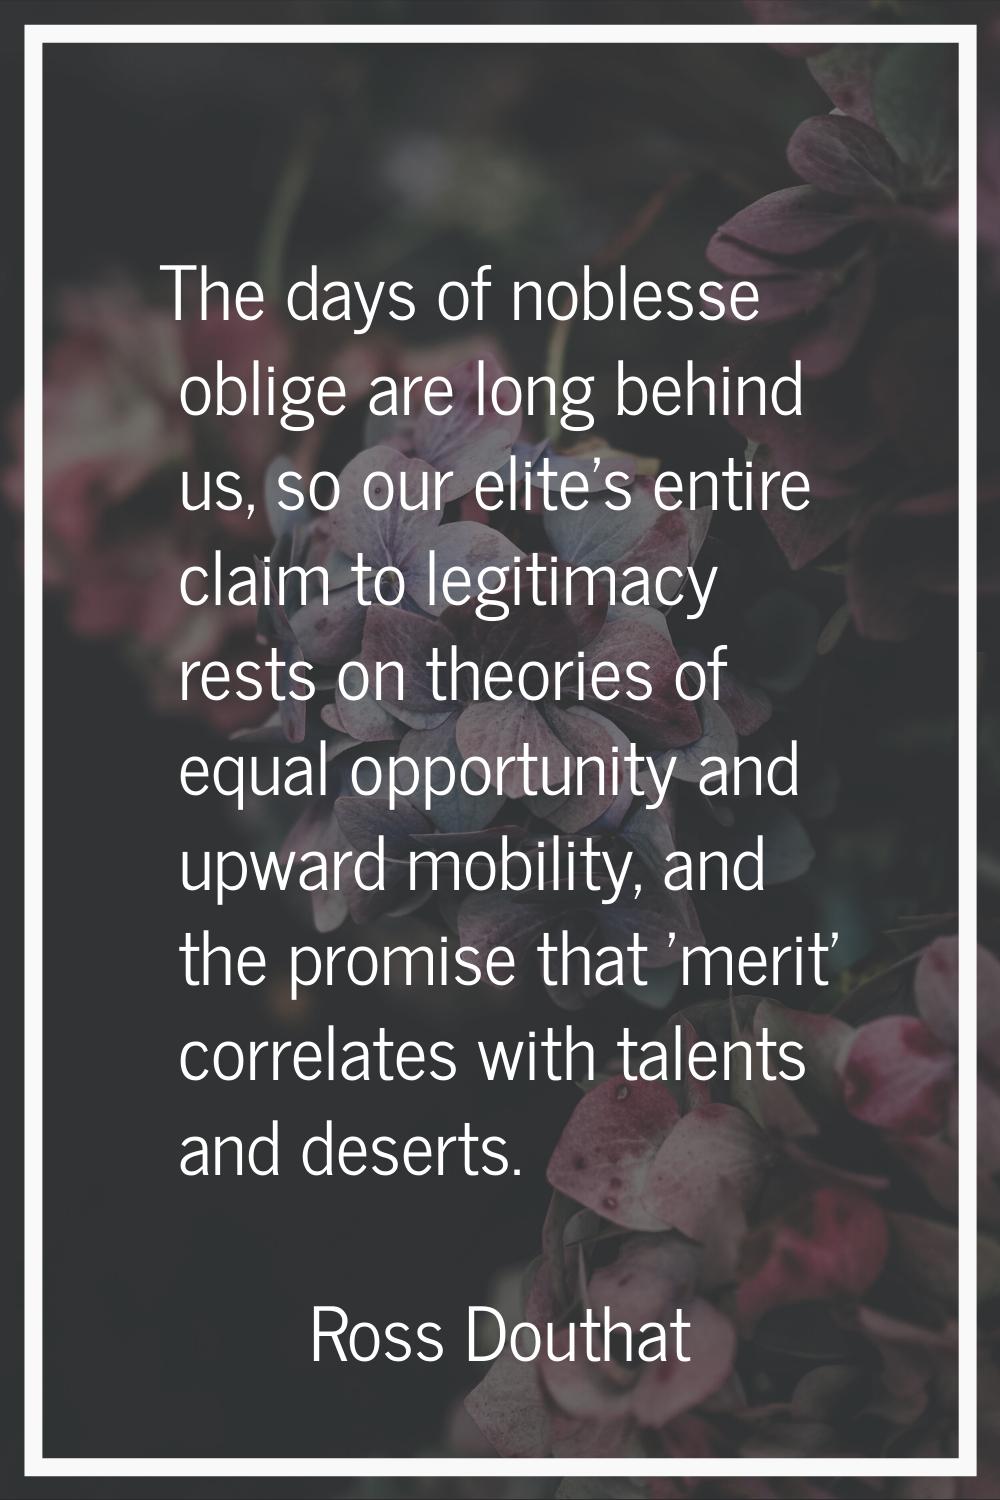 The days of noblesse oblige are long behind us, so our elite's entire claim to legitimacy rests on 